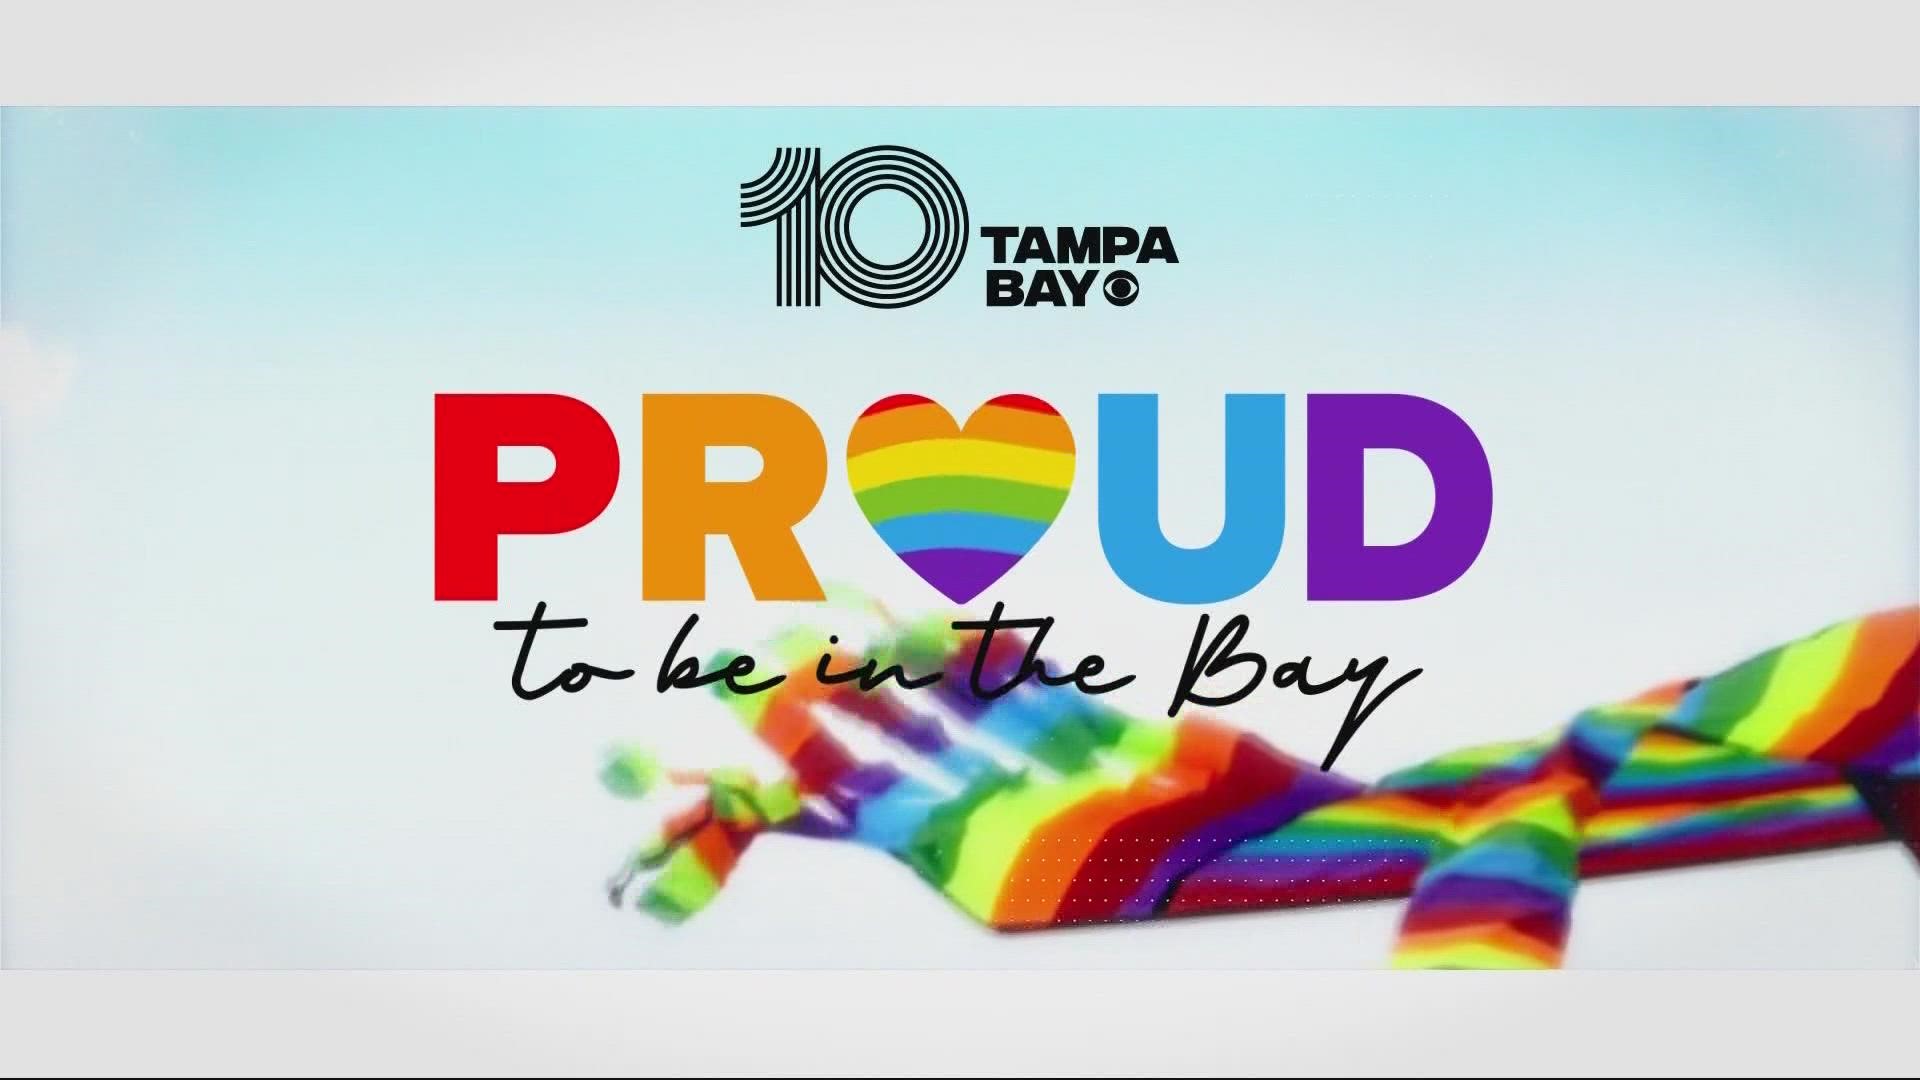 10 Tampa Bay's special, "Proud to be in the Bay," shows what makes the Pride Month celebrations so important to our community.